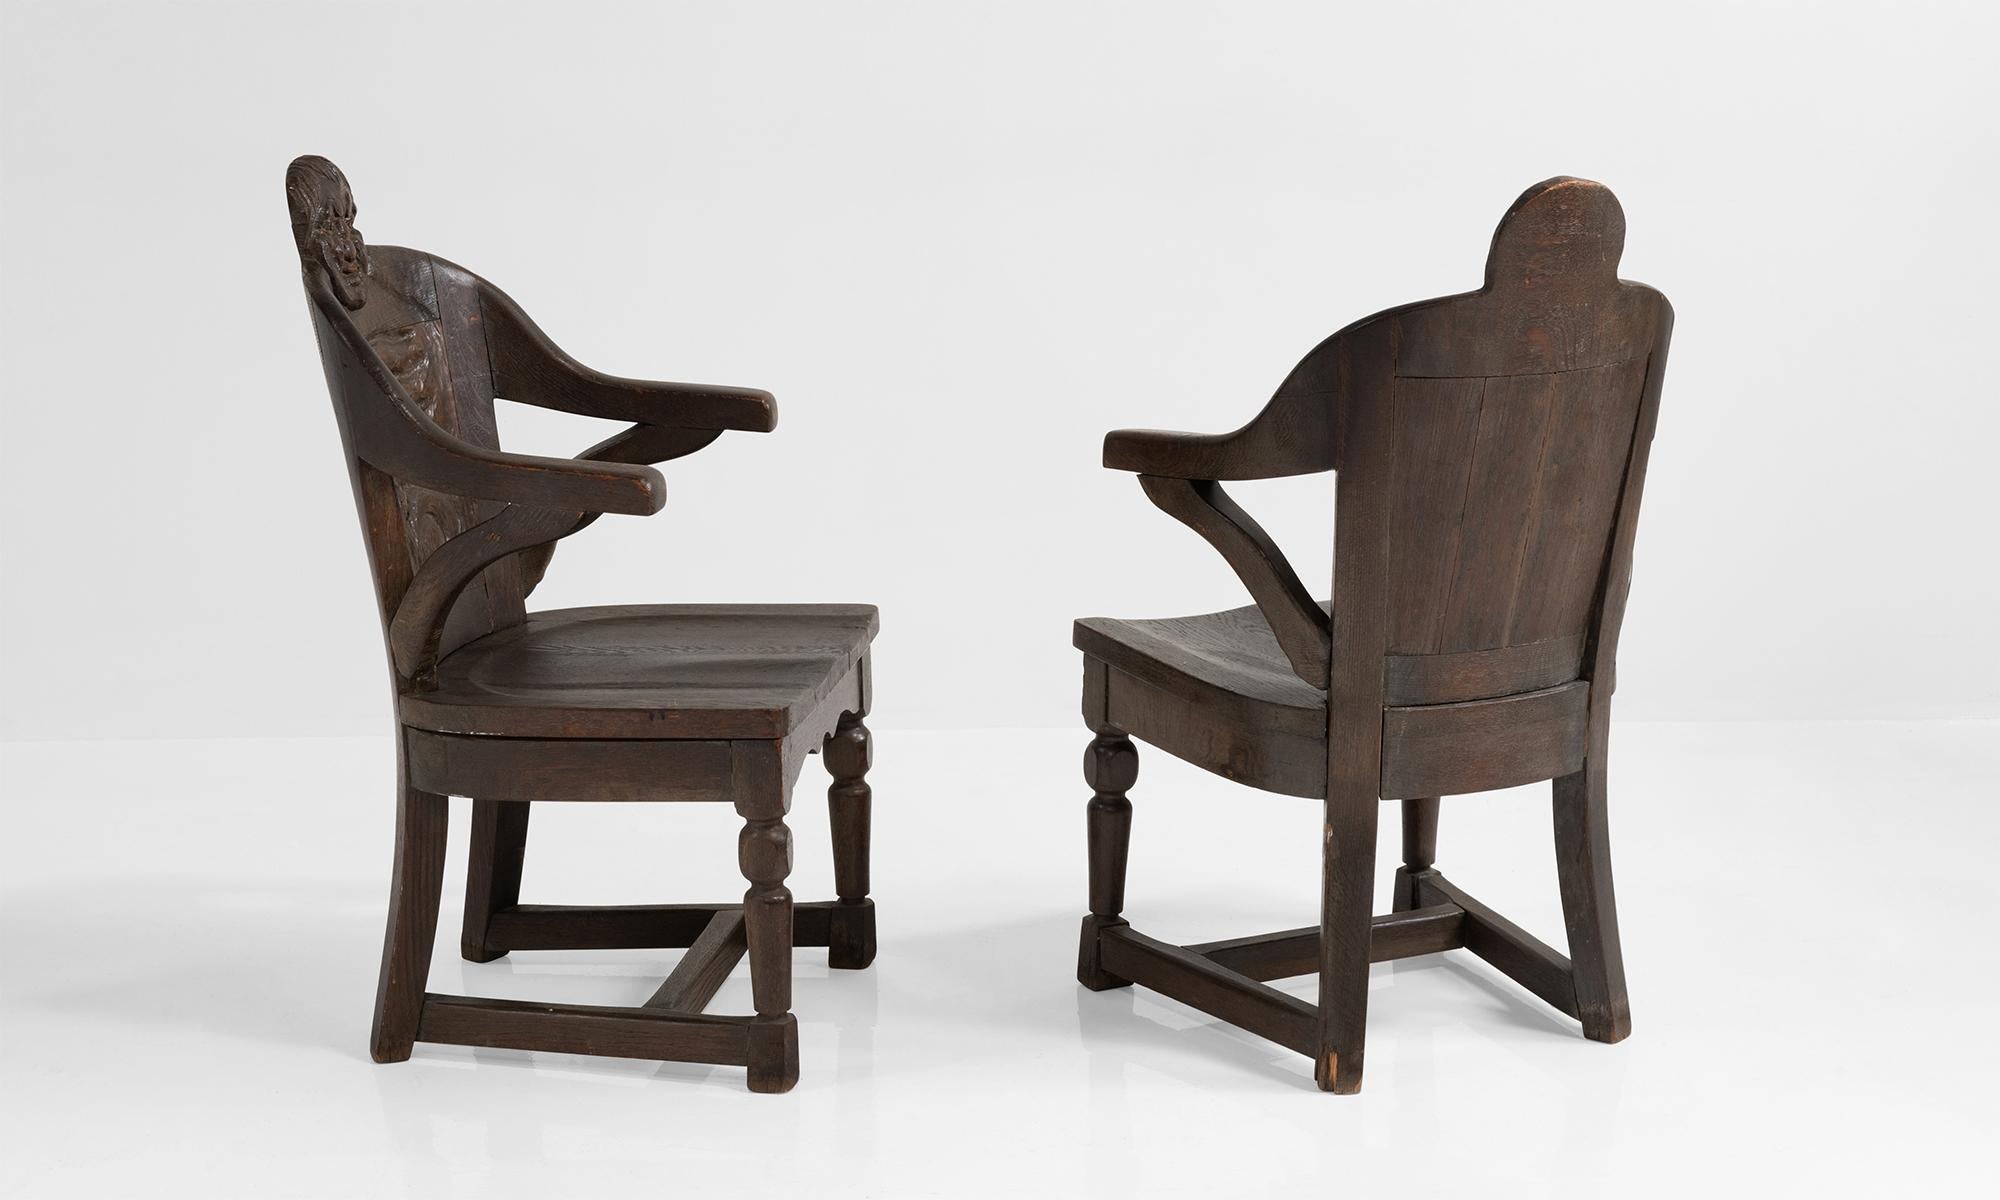 Carved solid oak chairs with male and female faces at the crown.